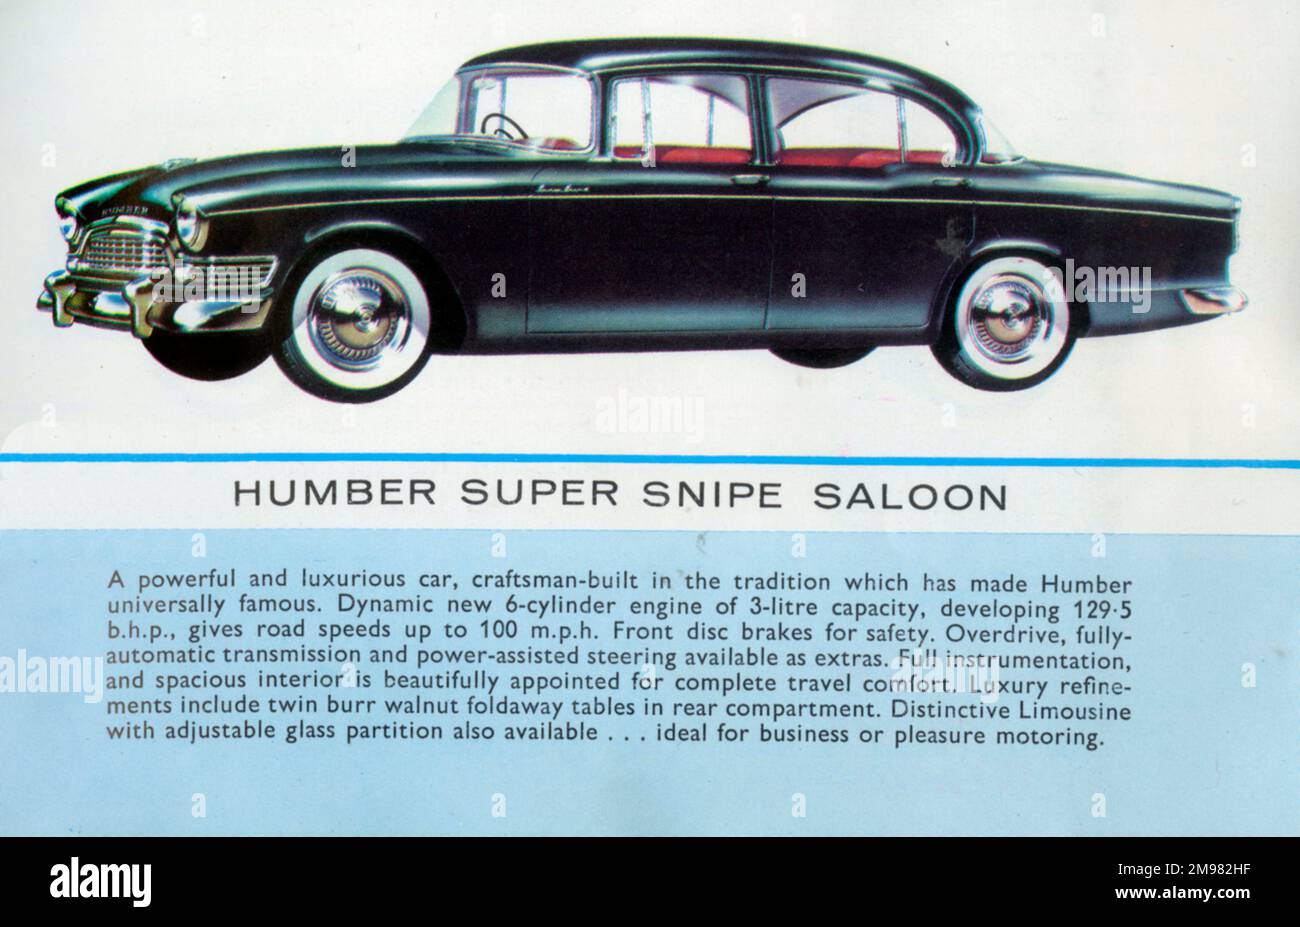 The Humber Super Snipe Saloon, advertised in a Humber, Hillman and Sunbeam Rootes Motors Limited brochure. Stock Photo